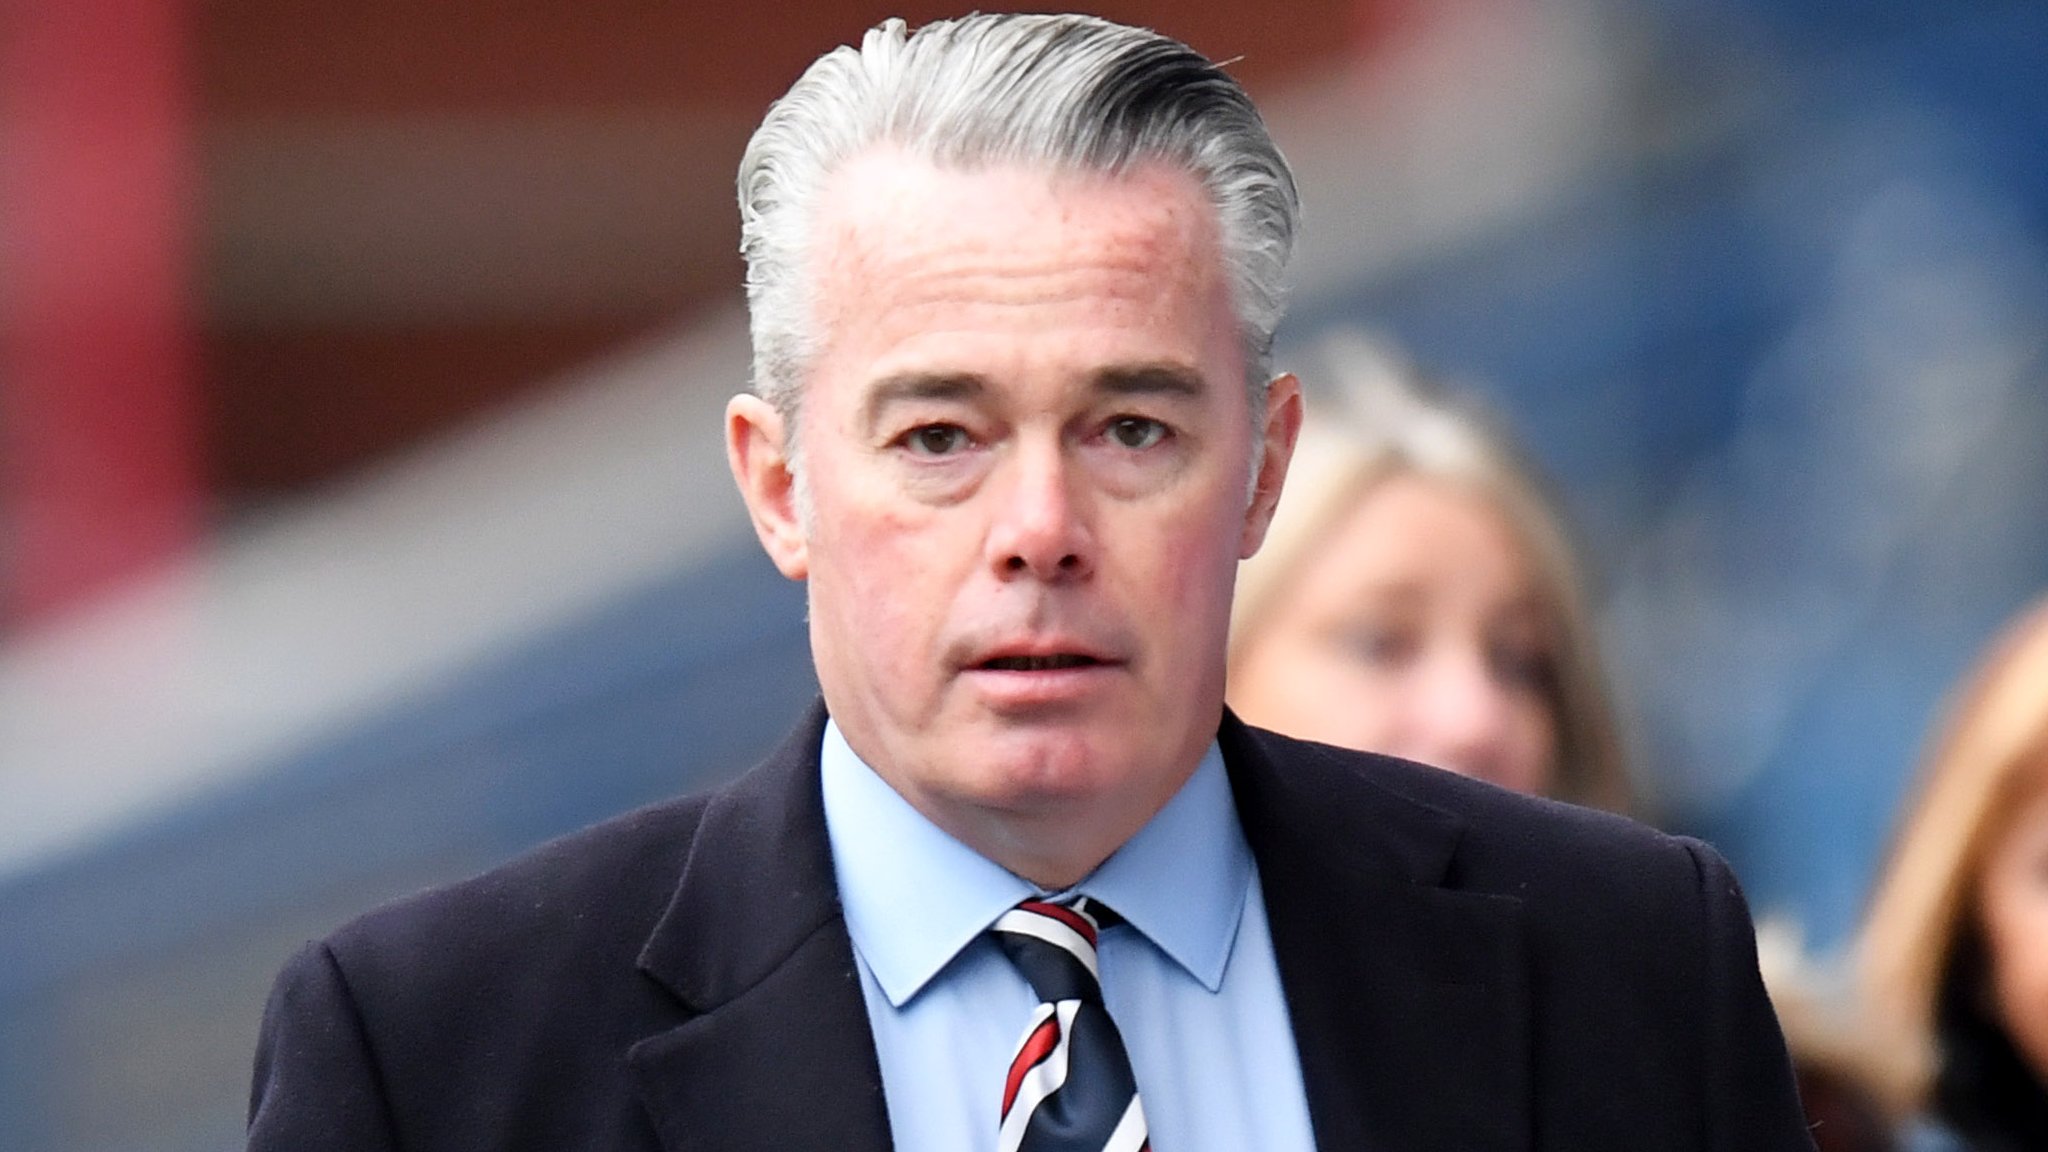 Rangers: Paul Murray and Barry Scott resign as club directors